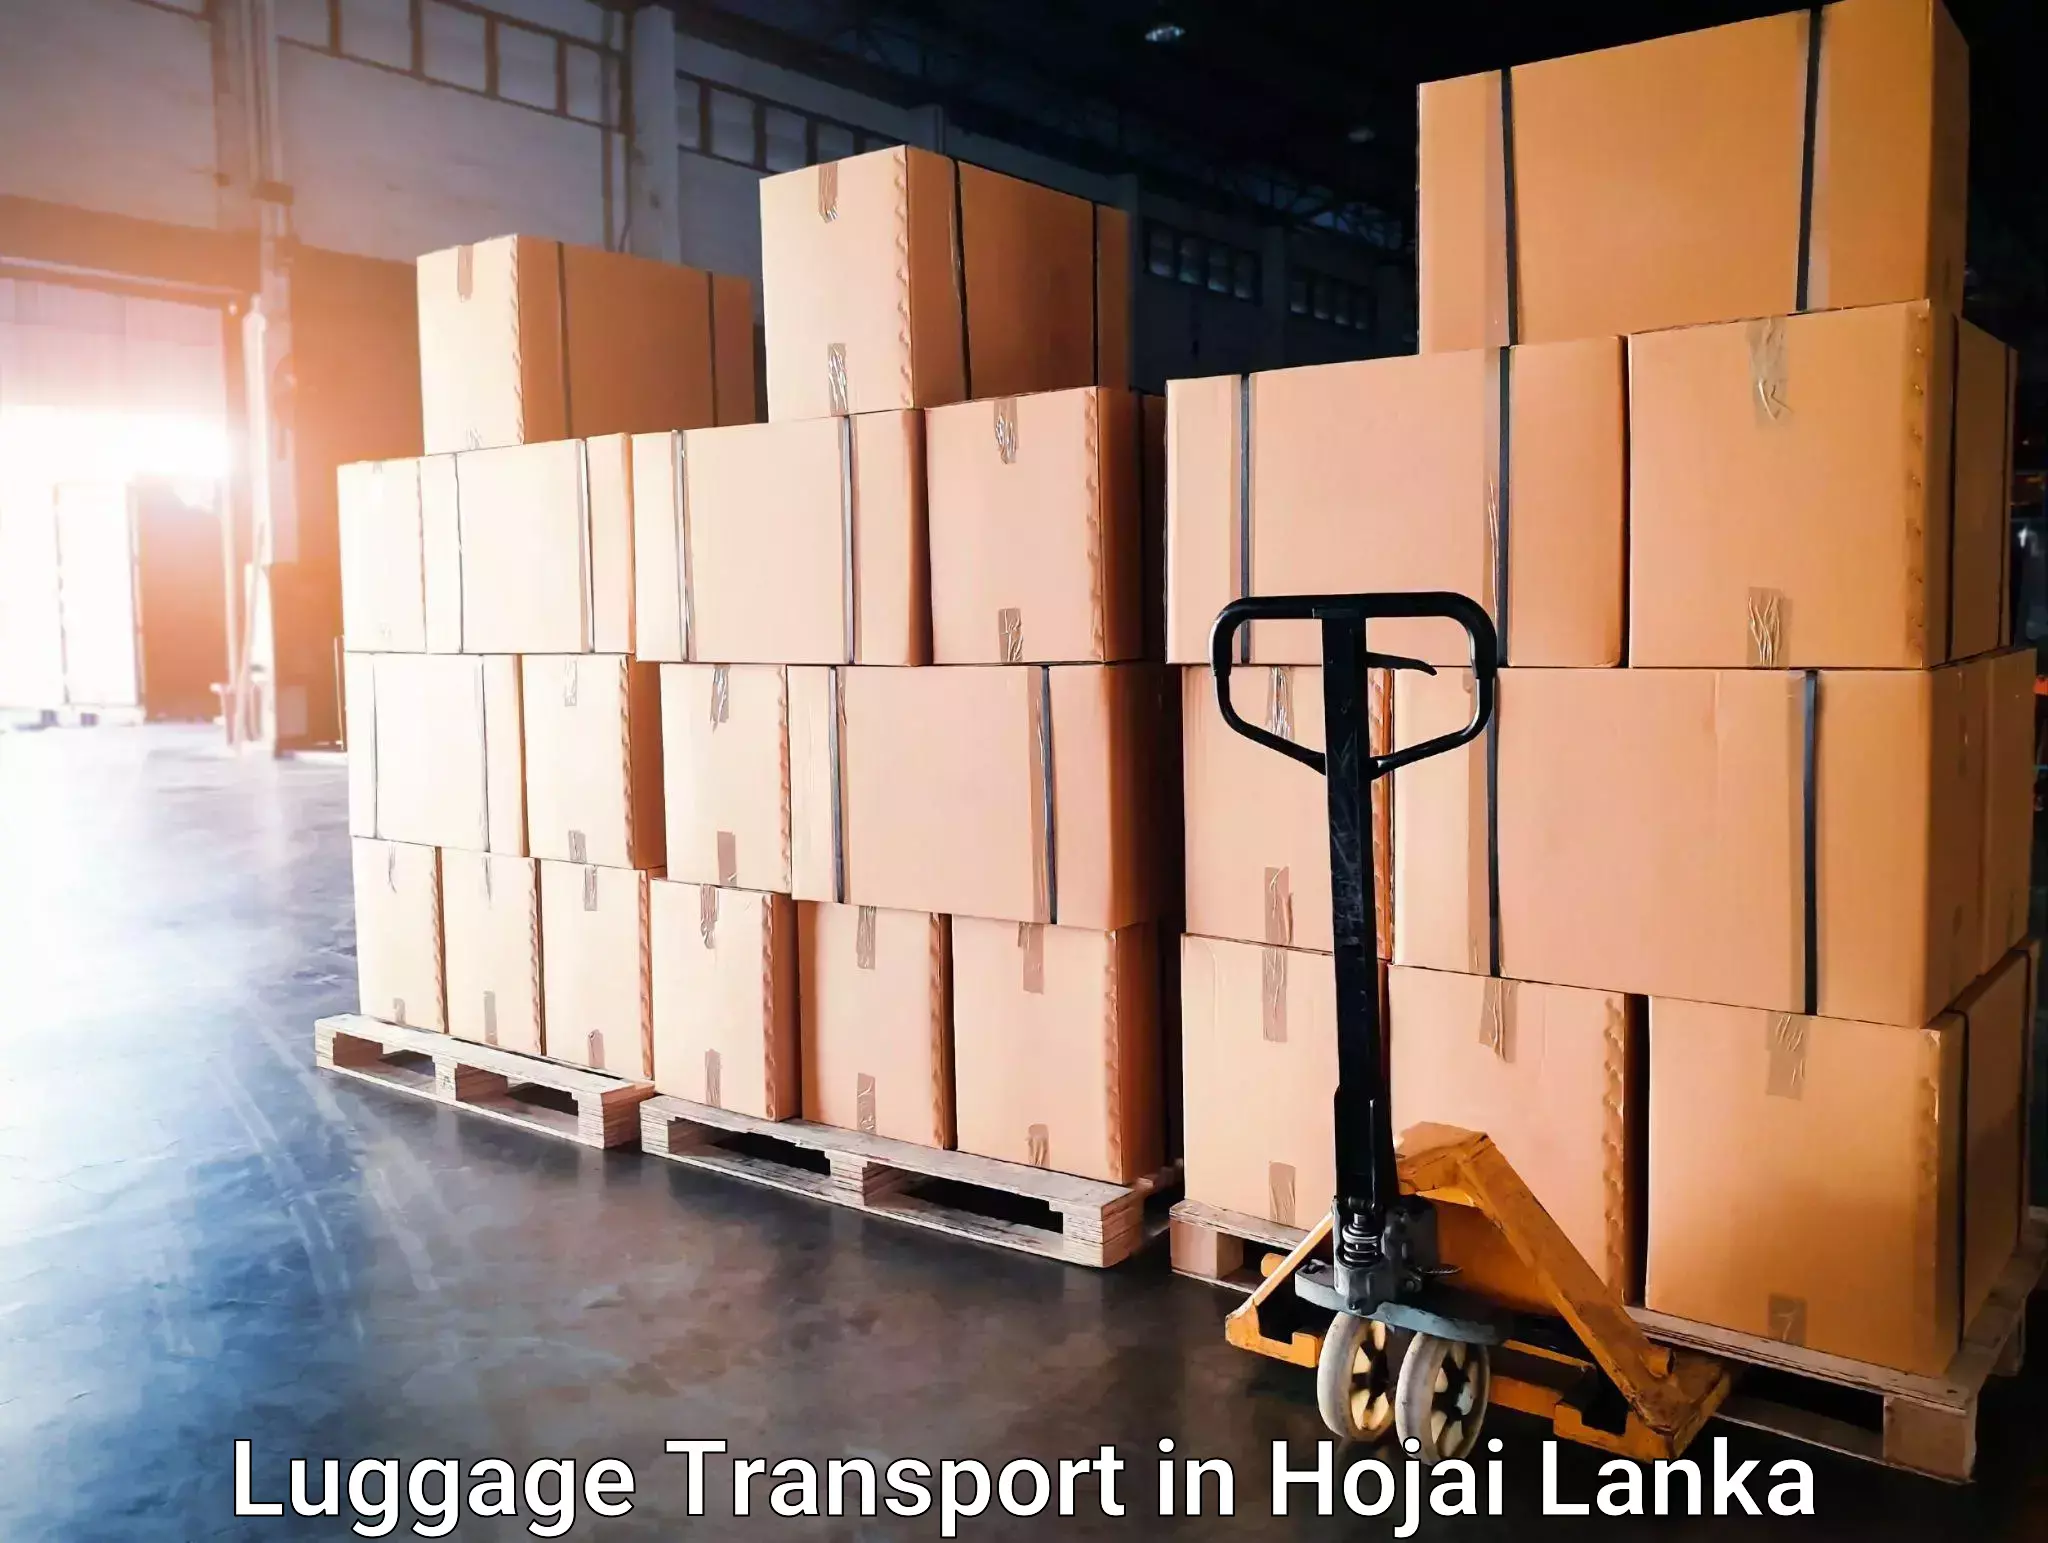 Express luggage delivery in Hojai Lanka